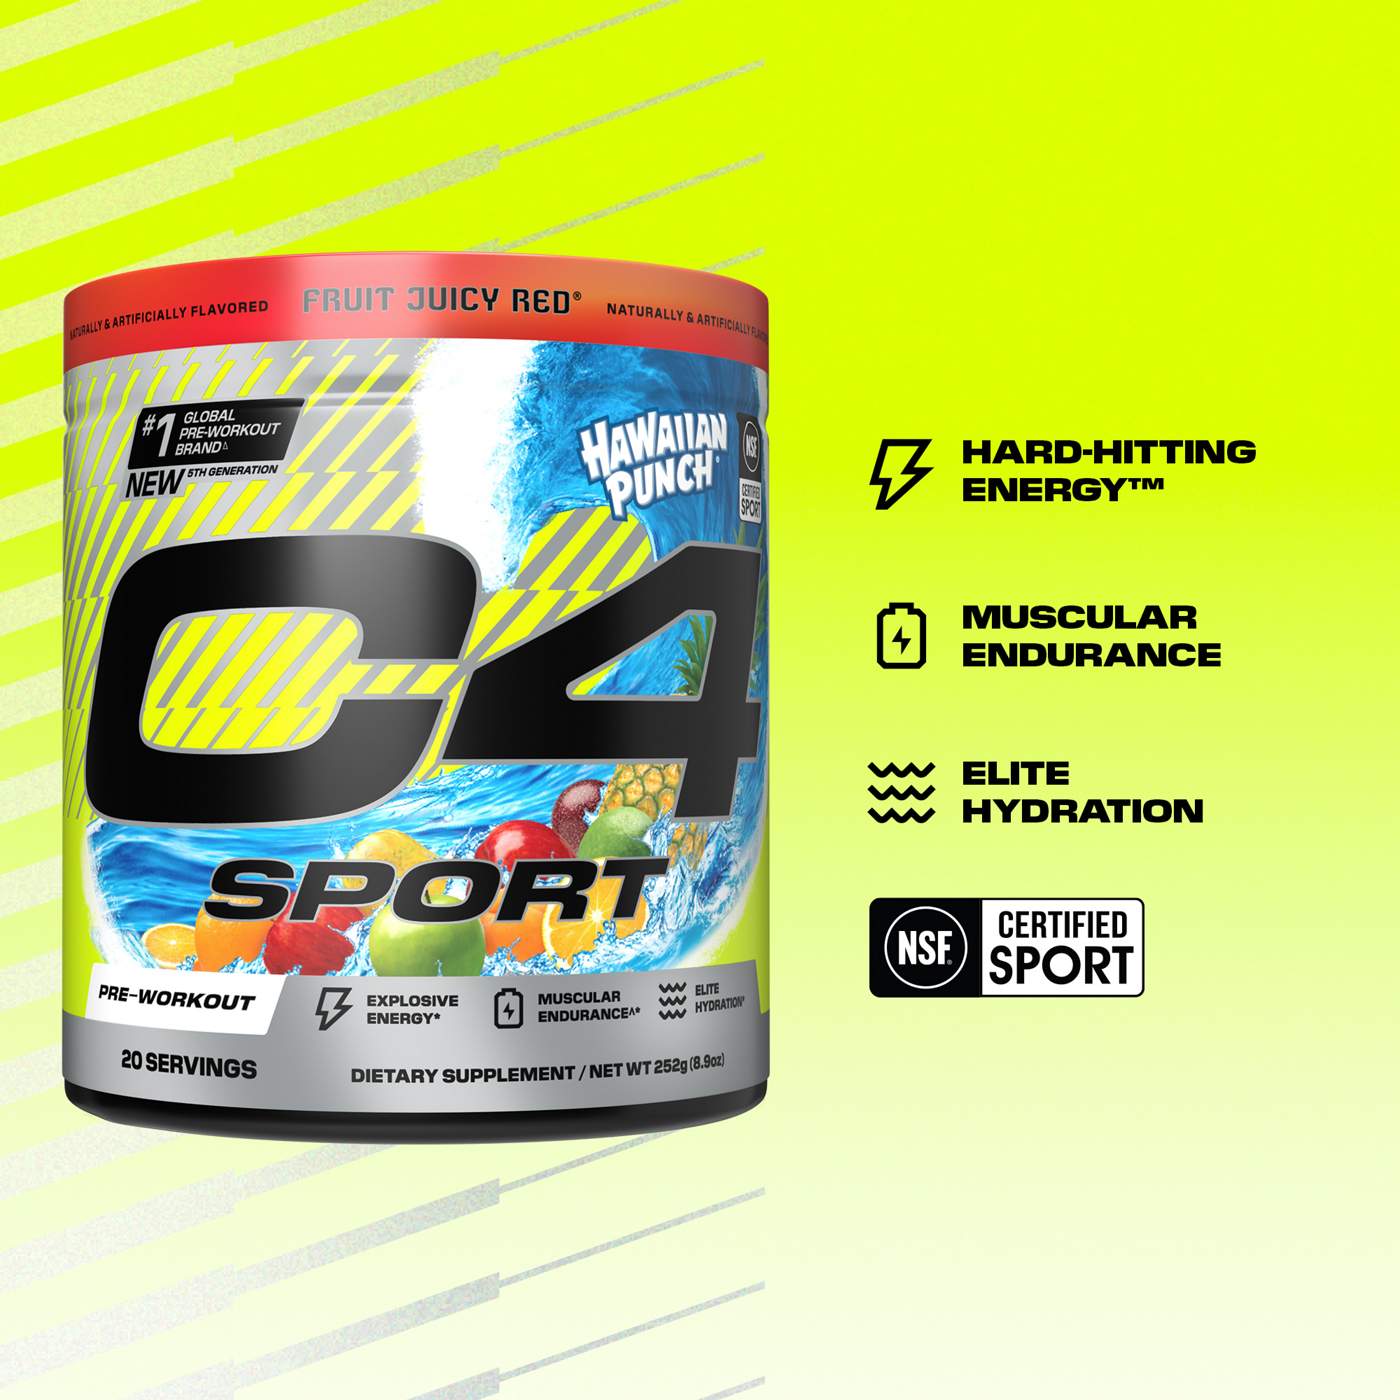 Cellucor C4 Sport Pre-Workout - Hawaiian Punch Fruit Juicy Red; image 2 of 12